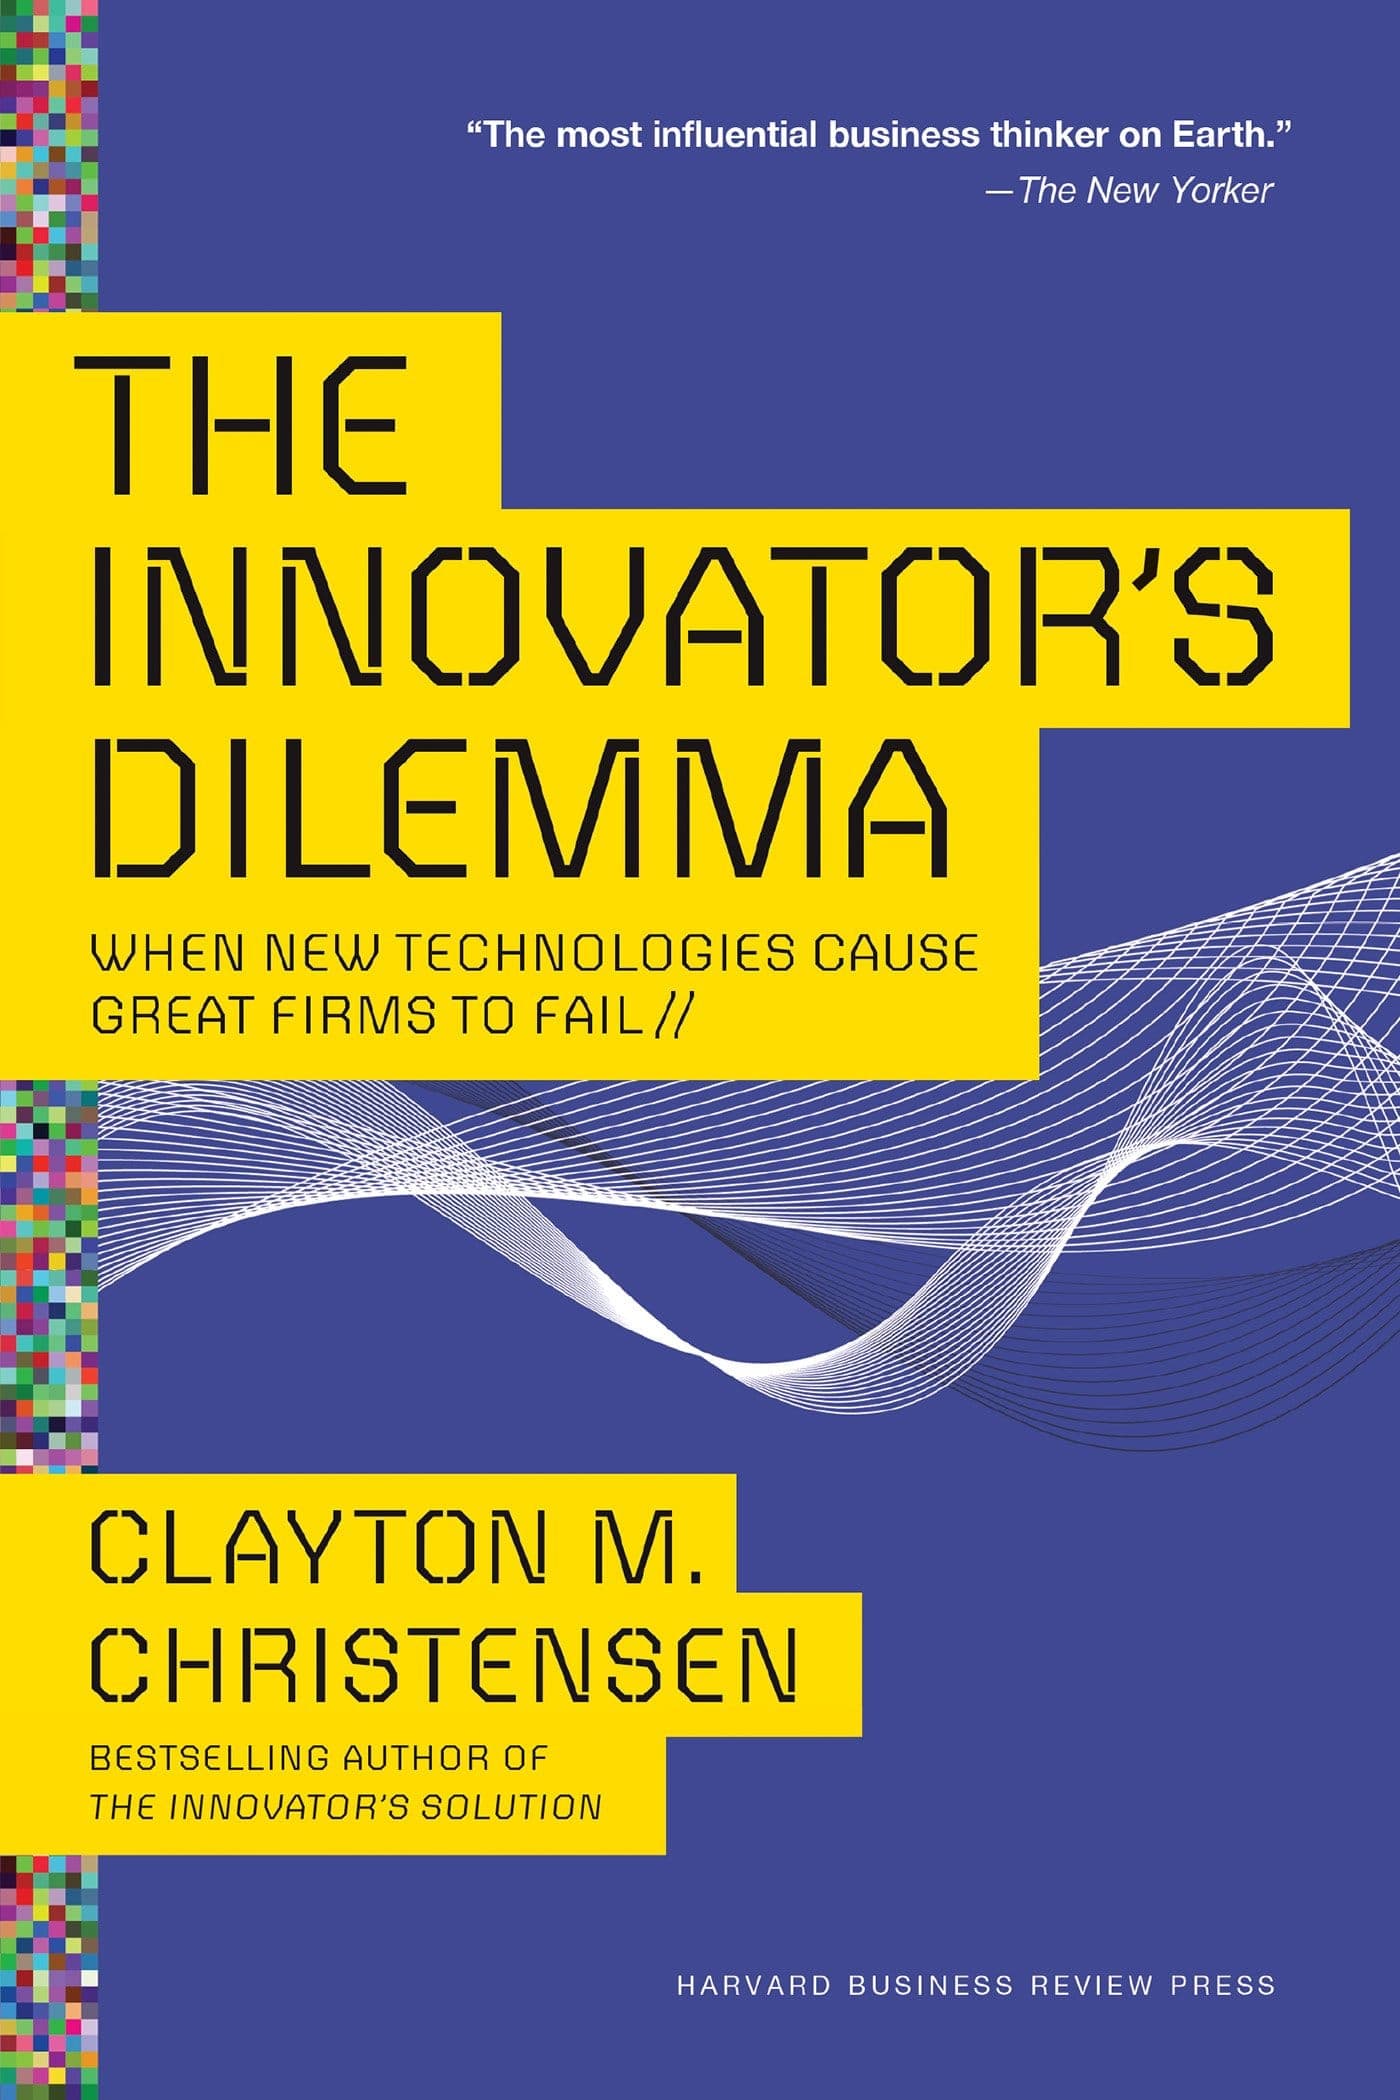 The cover of The Innovator's Dilemma